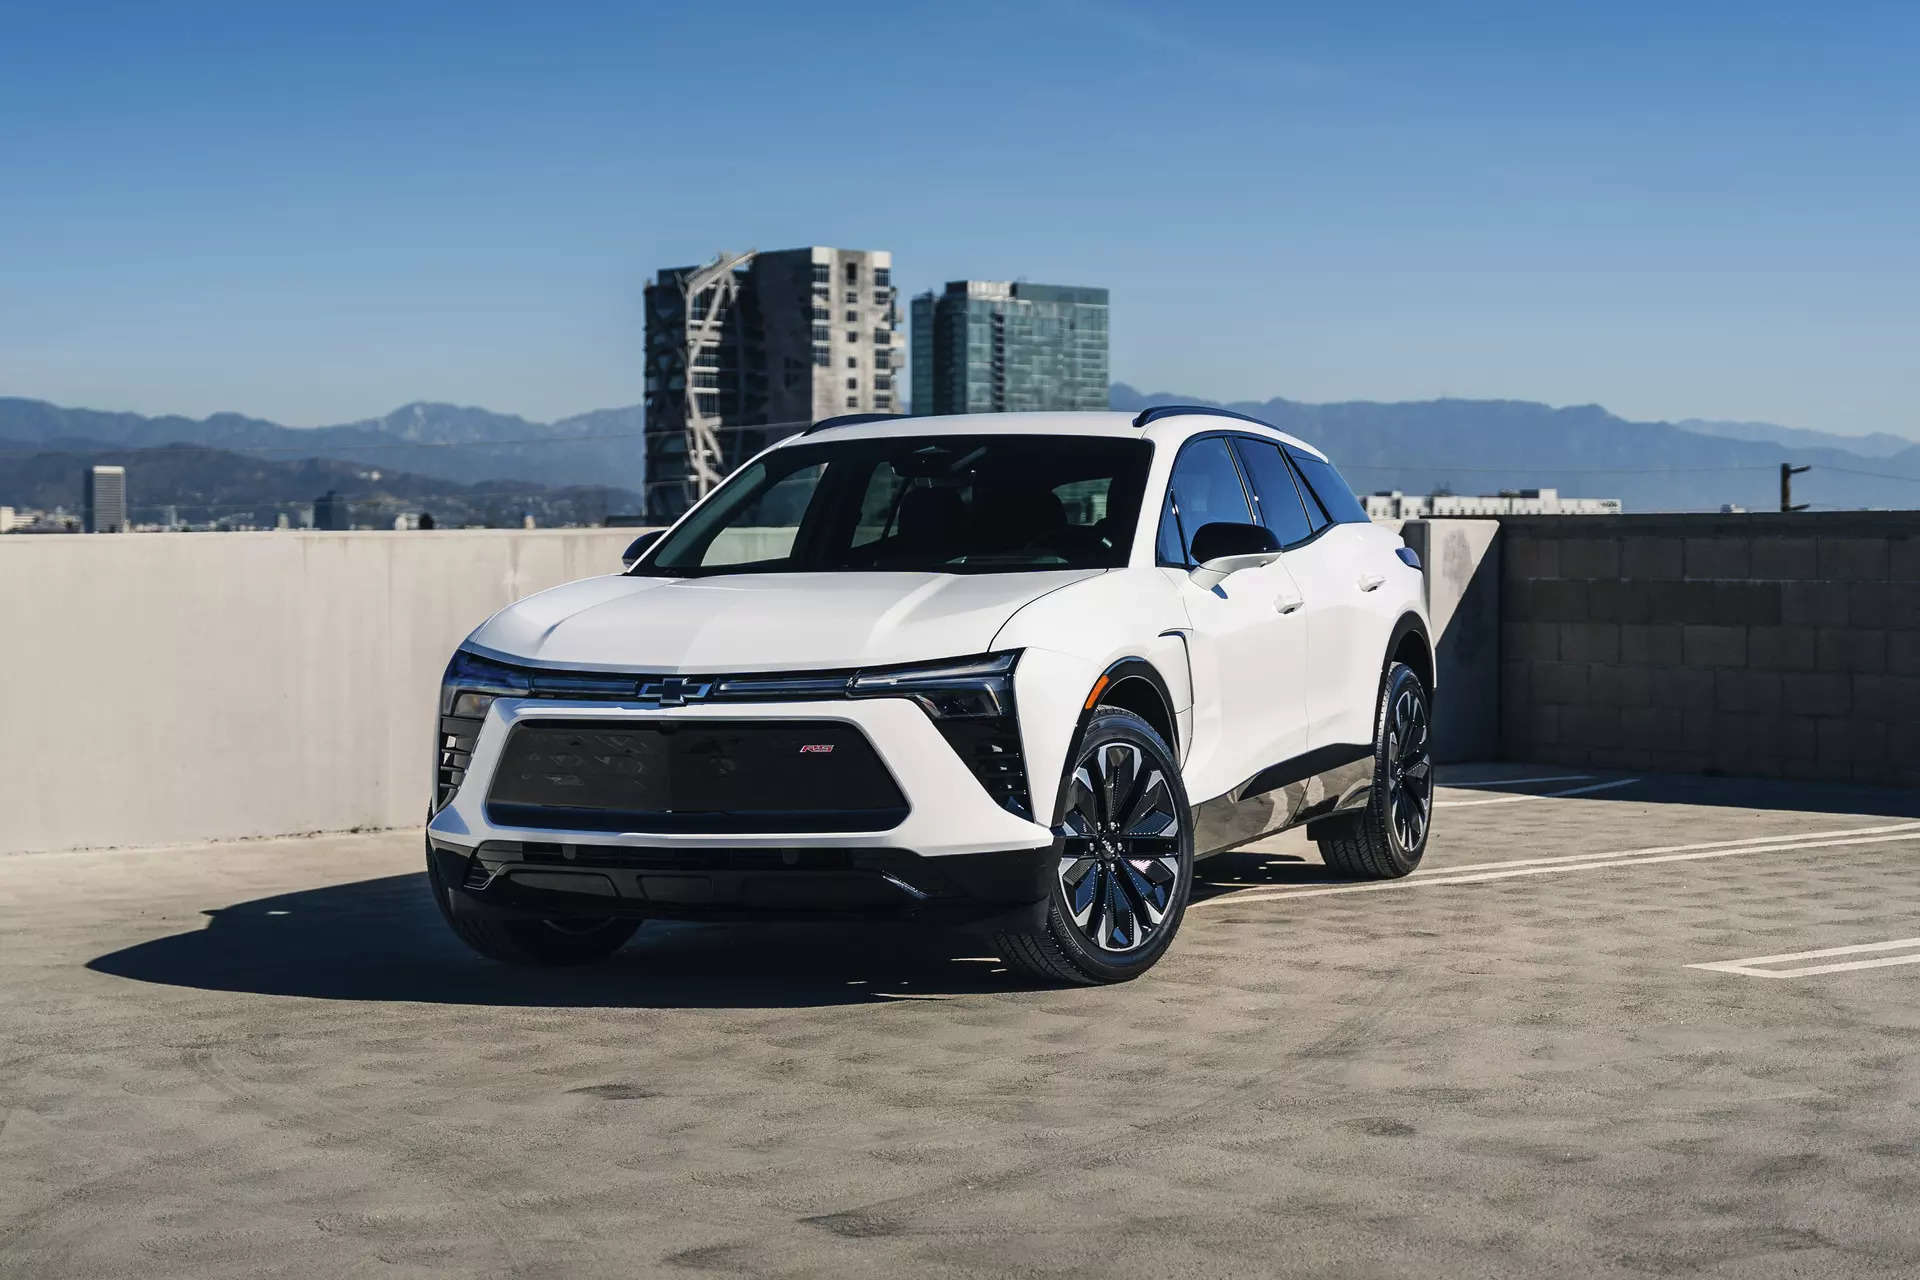 <p>The Blazer price cuts and restored tax credit bring the effective price for qualified buyers down to USD 42,695 from the original USD 56,715 for the lowest-priced model.</p>